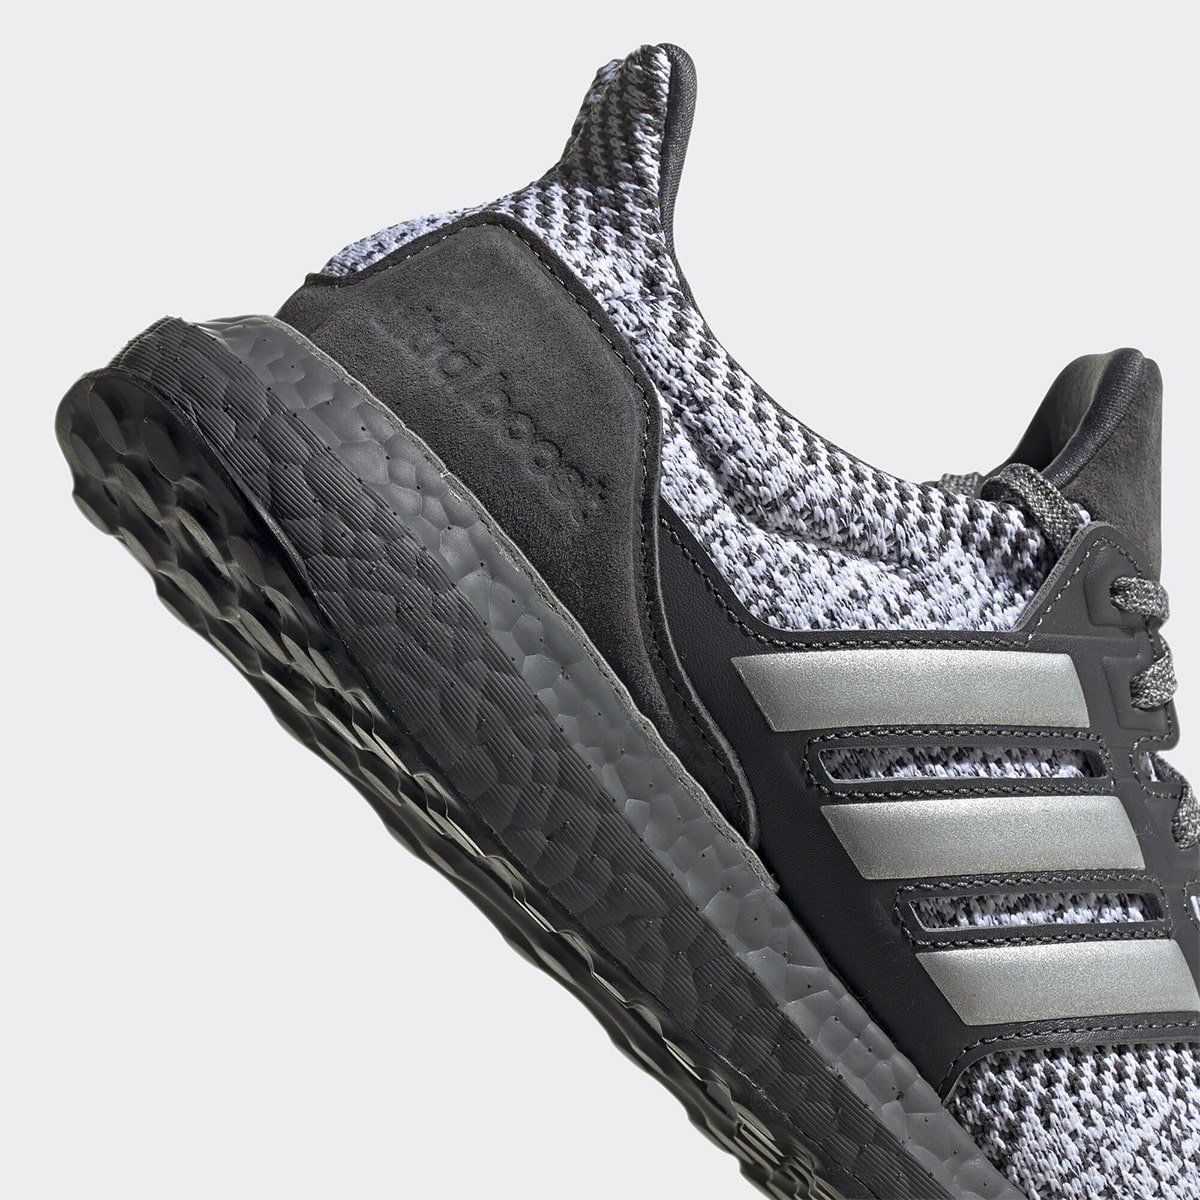 En lo que respecta a las personas Llorar Comandante adidas Works in Leather, Suede, and New Weaves to the Ultra BOOST DNA |  HOUSE OF HEAT